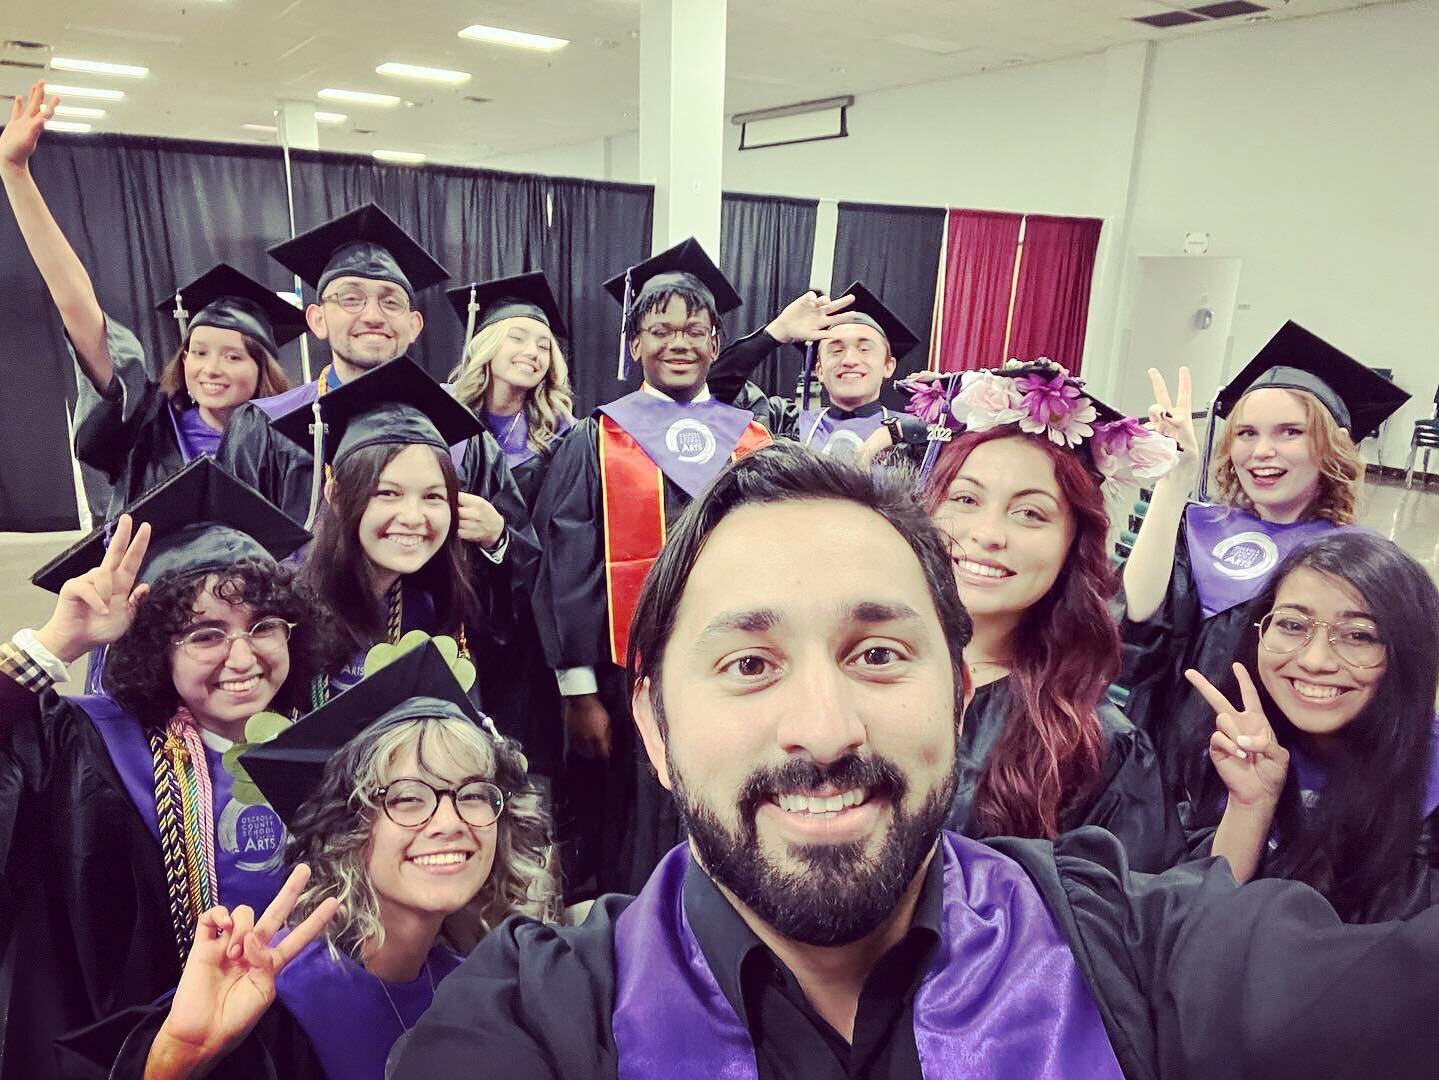 Congratulations to my last batch of OCSA seniors Class of 2022! 🎻 Pleasure creating art and memories with you the last 6 years! 💜 
.
.
.
.
.
.
.
.
.
.
.
#orchestra #maestro #conductor #strings #wind  #violin #viola #cello #bass #percussion #musiced